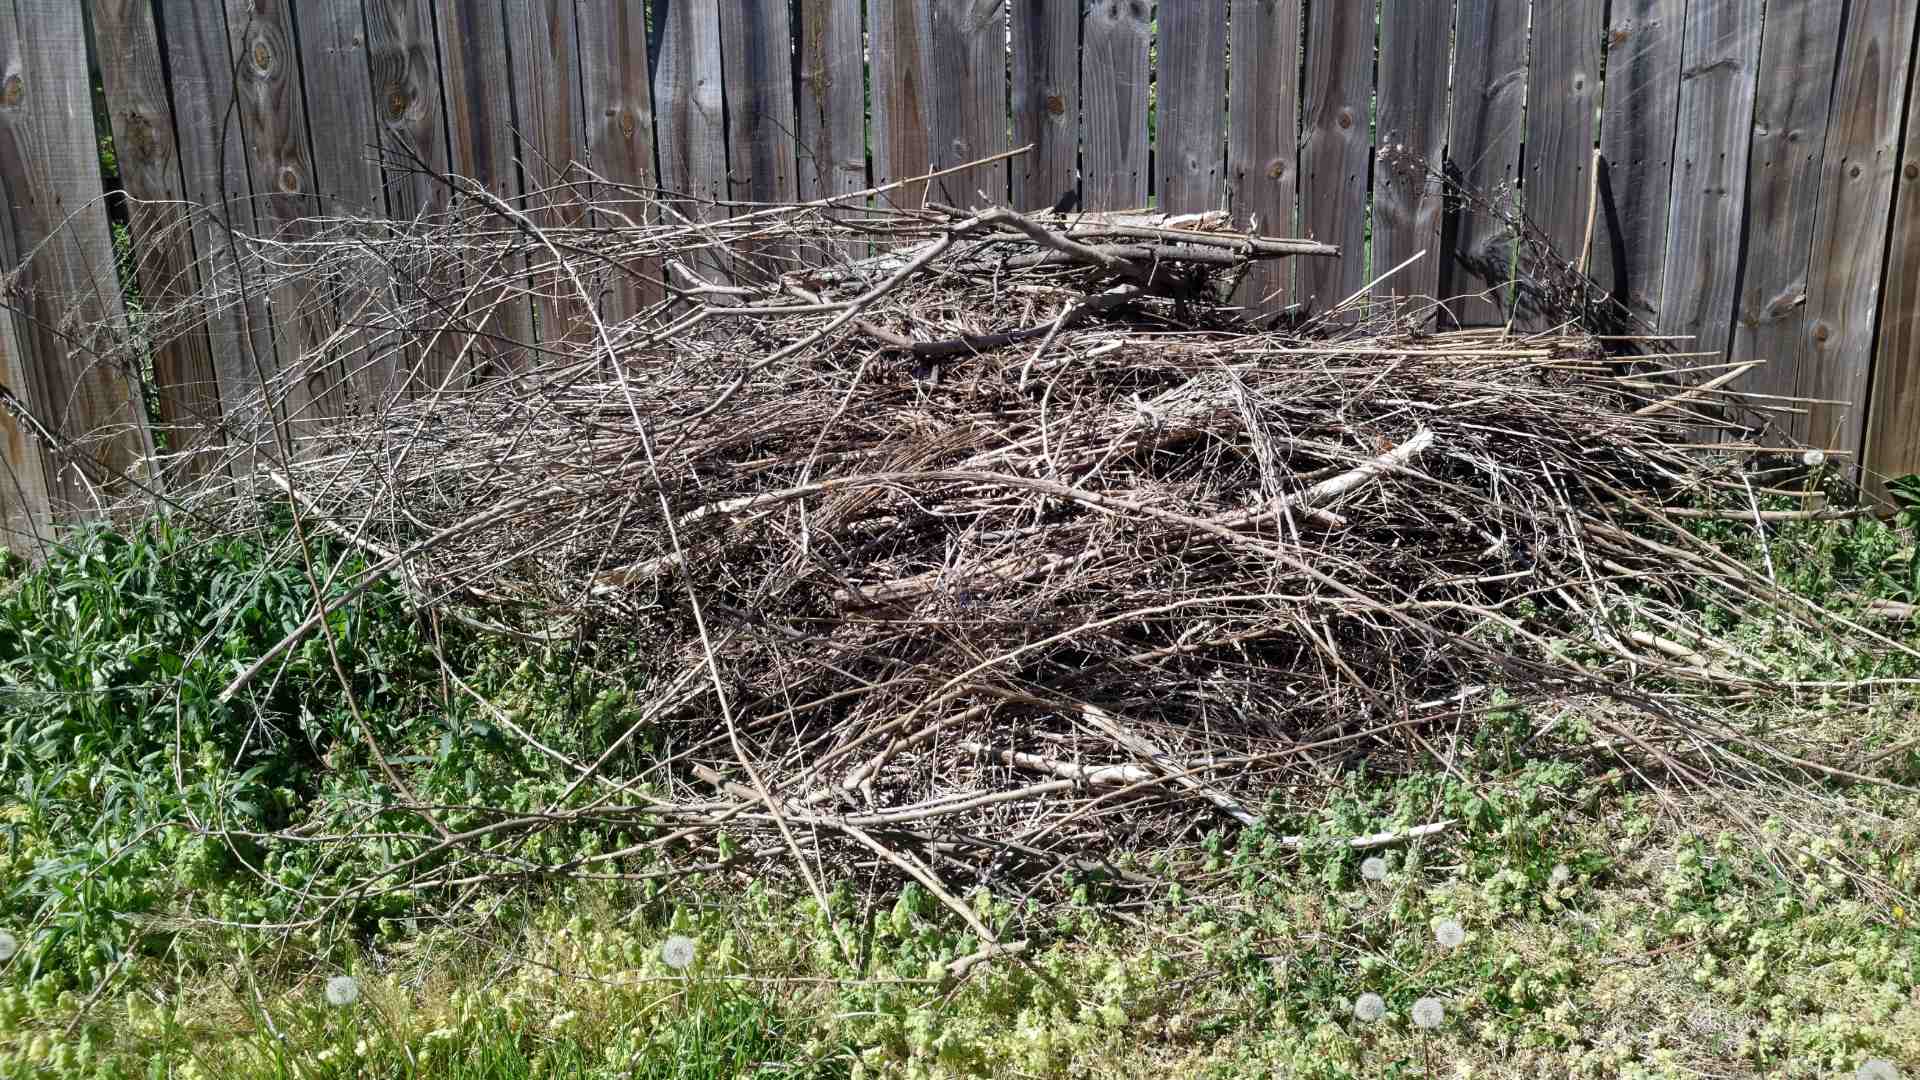 Cleaning up Lawn Debris in the Spring Is More Important Than You Think